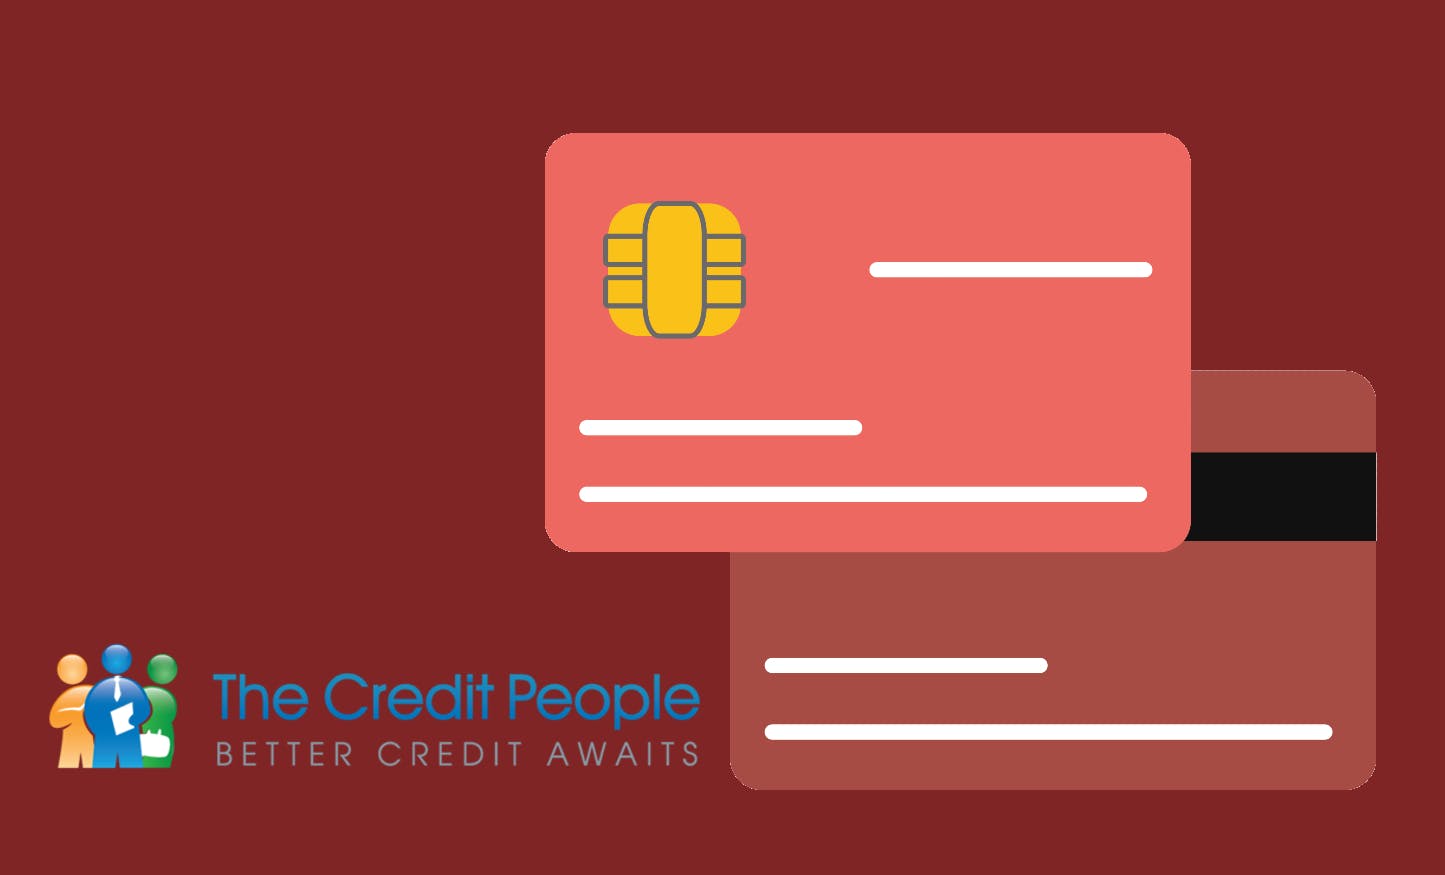 The Credit People: Your Credit's Superheroes